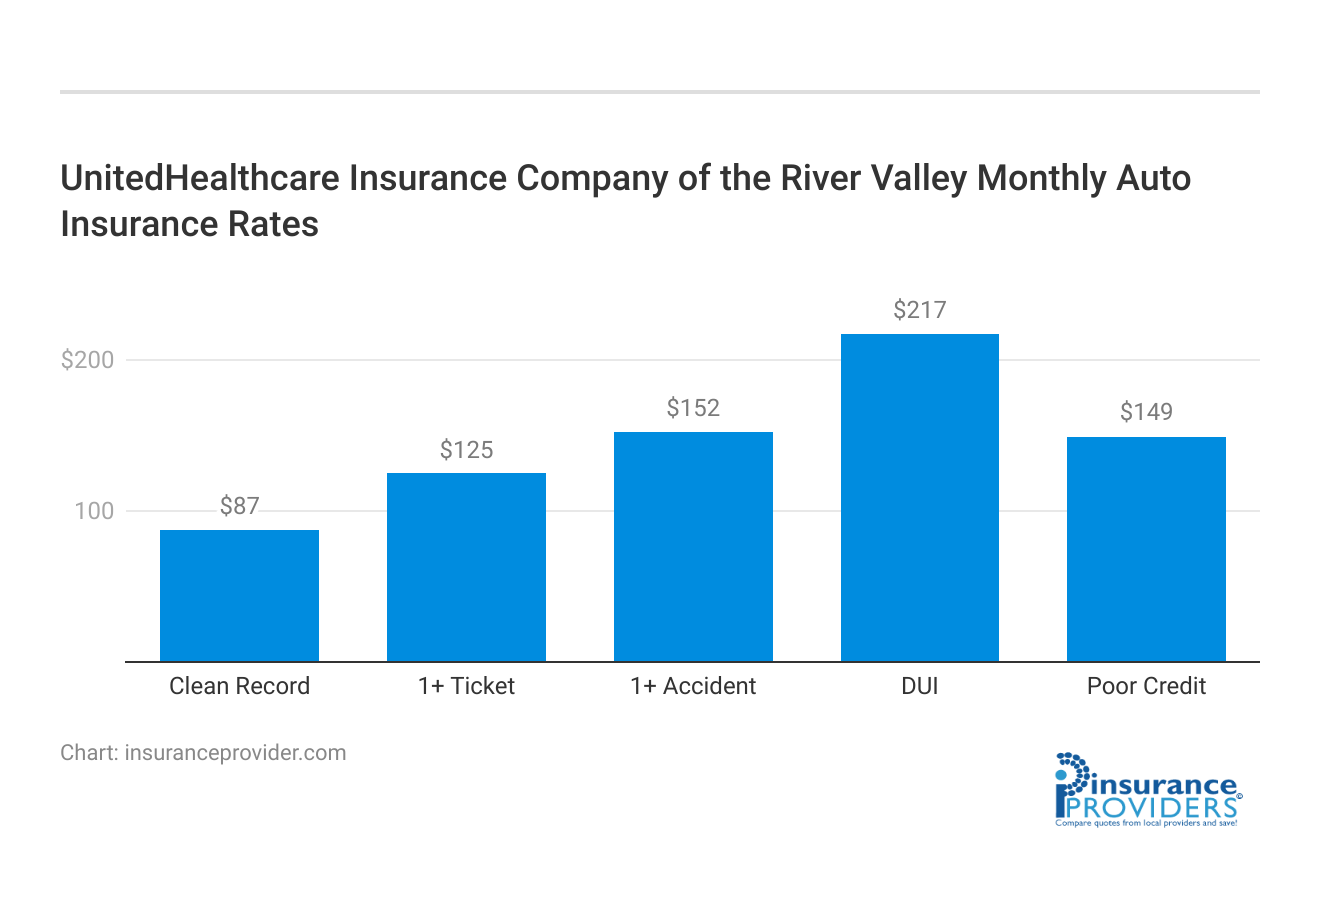 <h3>UnitedHealthcare Insurance Company of the River Valley Monthly Auto Insurance Rates</h3>